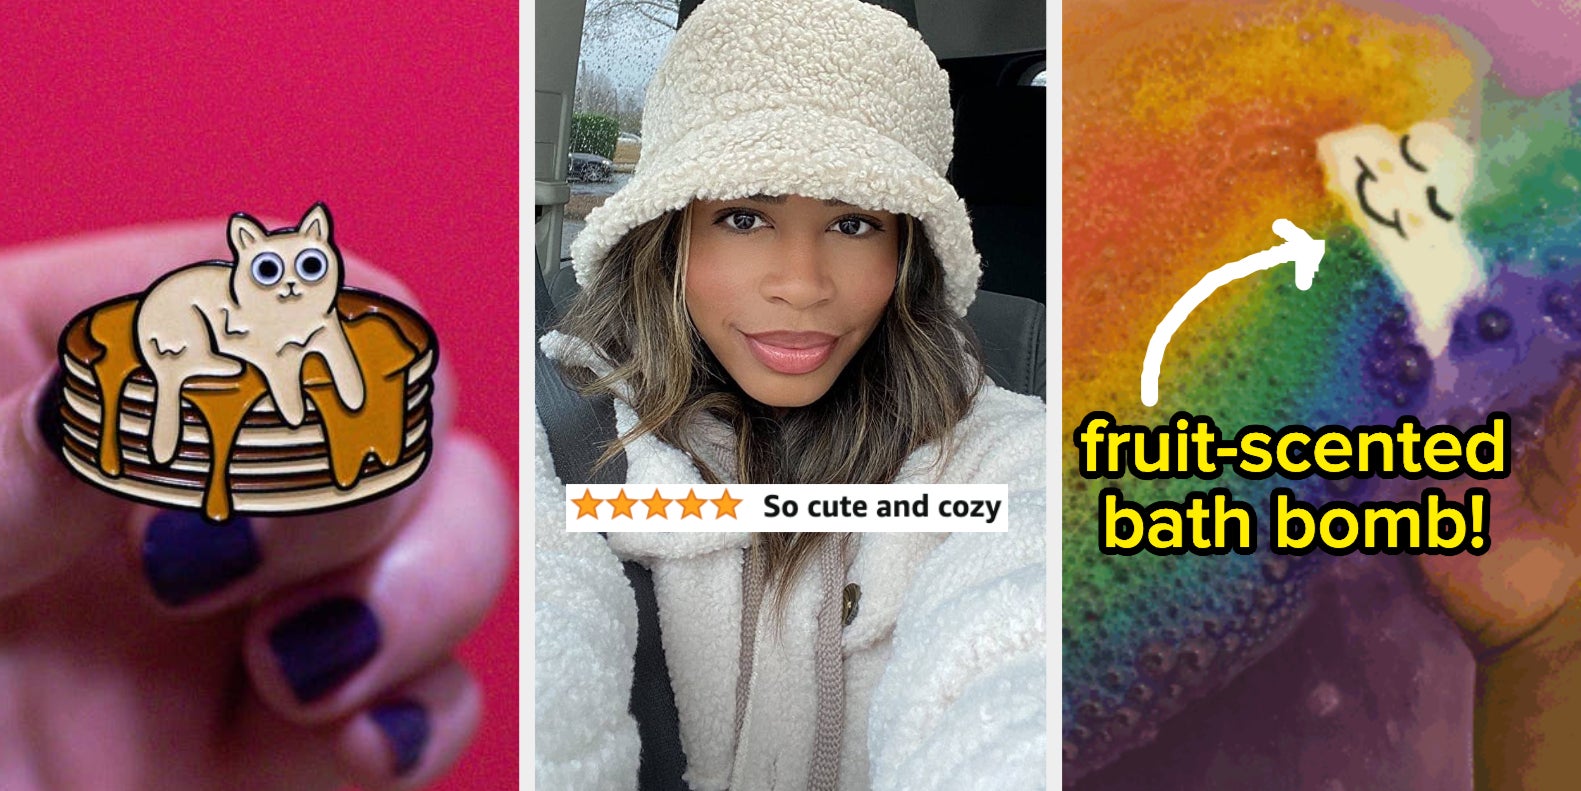 26 Products Under $25 To Treat Yourself To